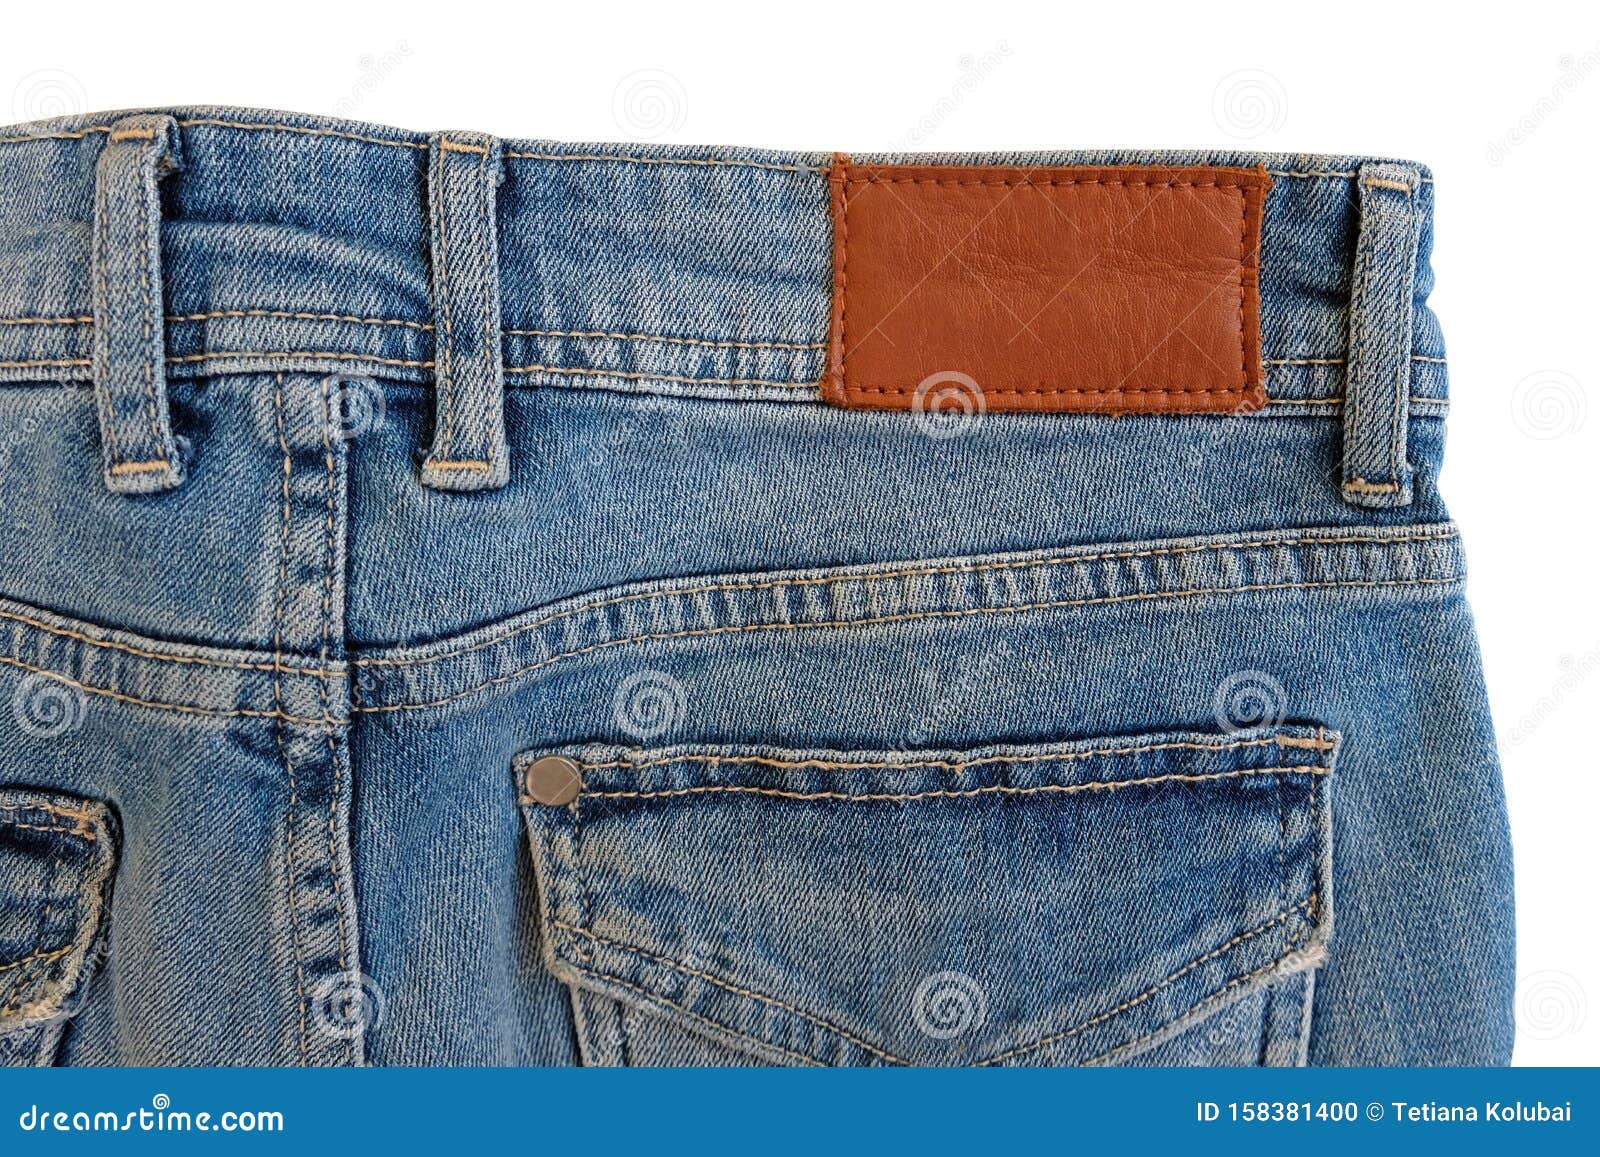 Blank Brown Leather Label Sewed on a Blue Jeans. Stock Photo - Image of ...